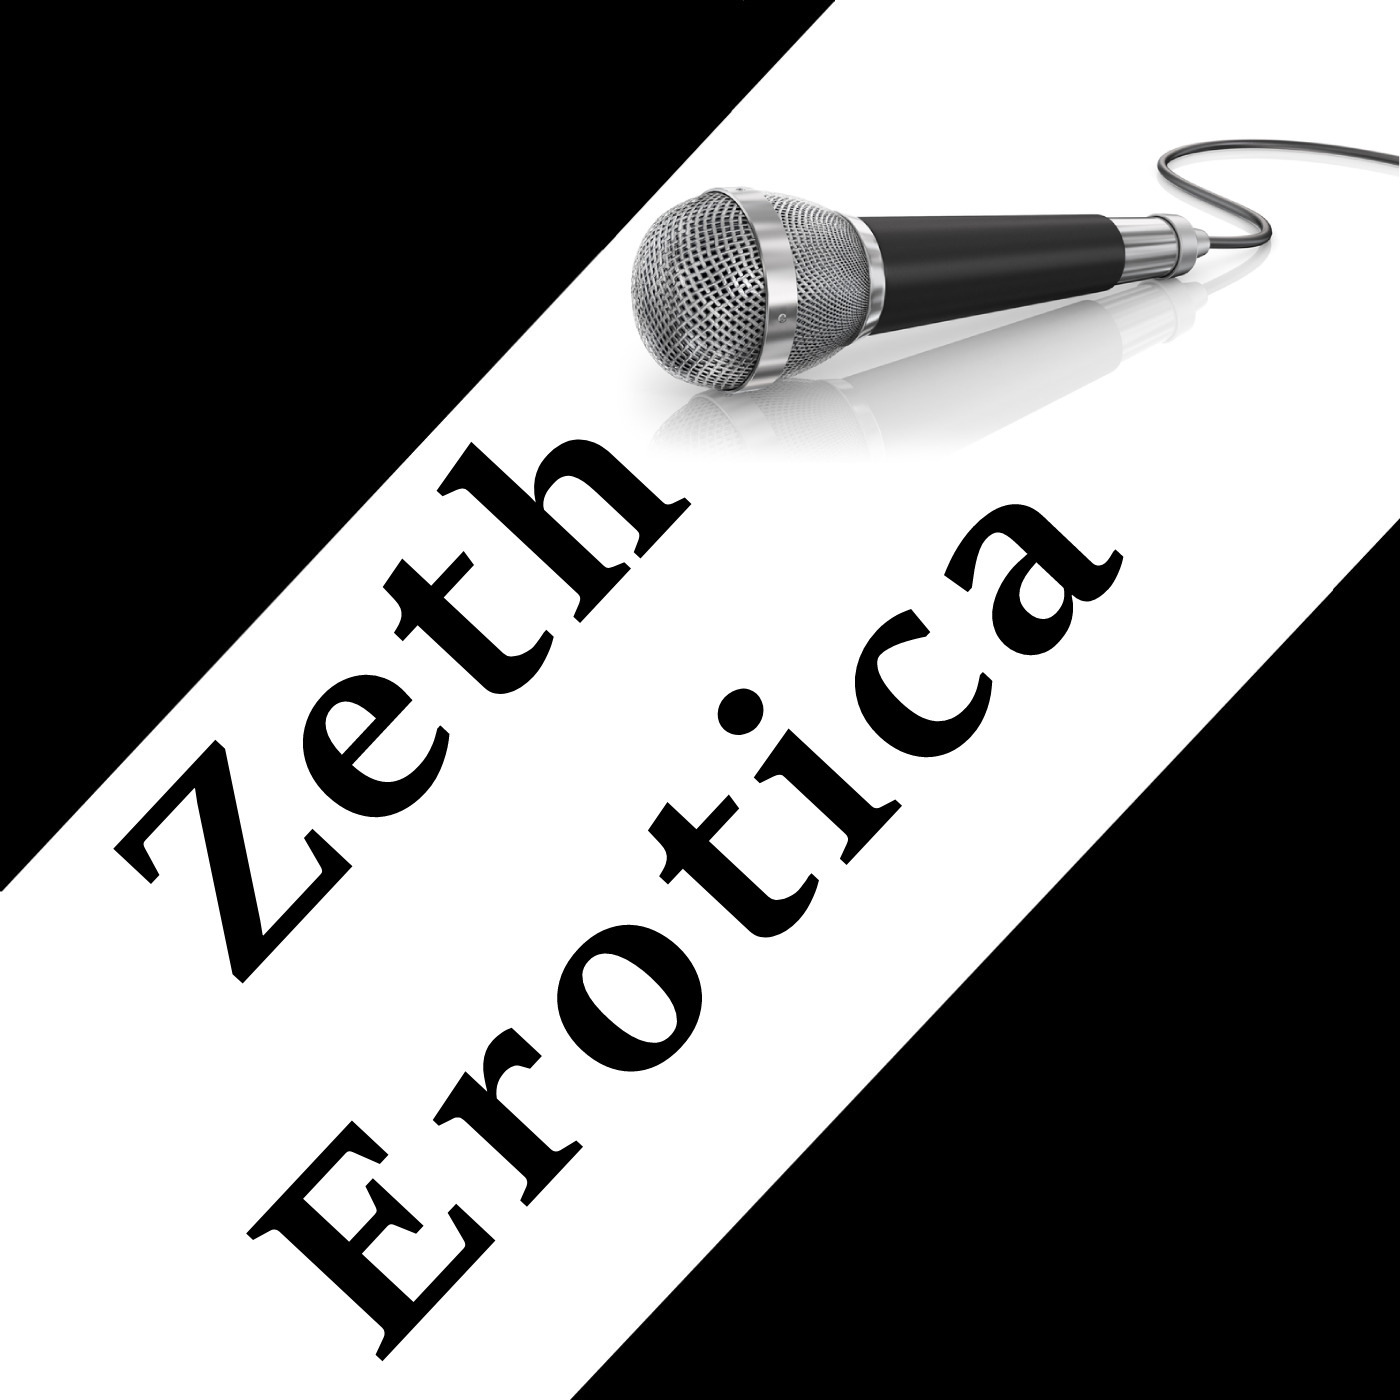 ZethErotica- Ride a Dildo Strapped to My Face- M4M Gay Erotic Story